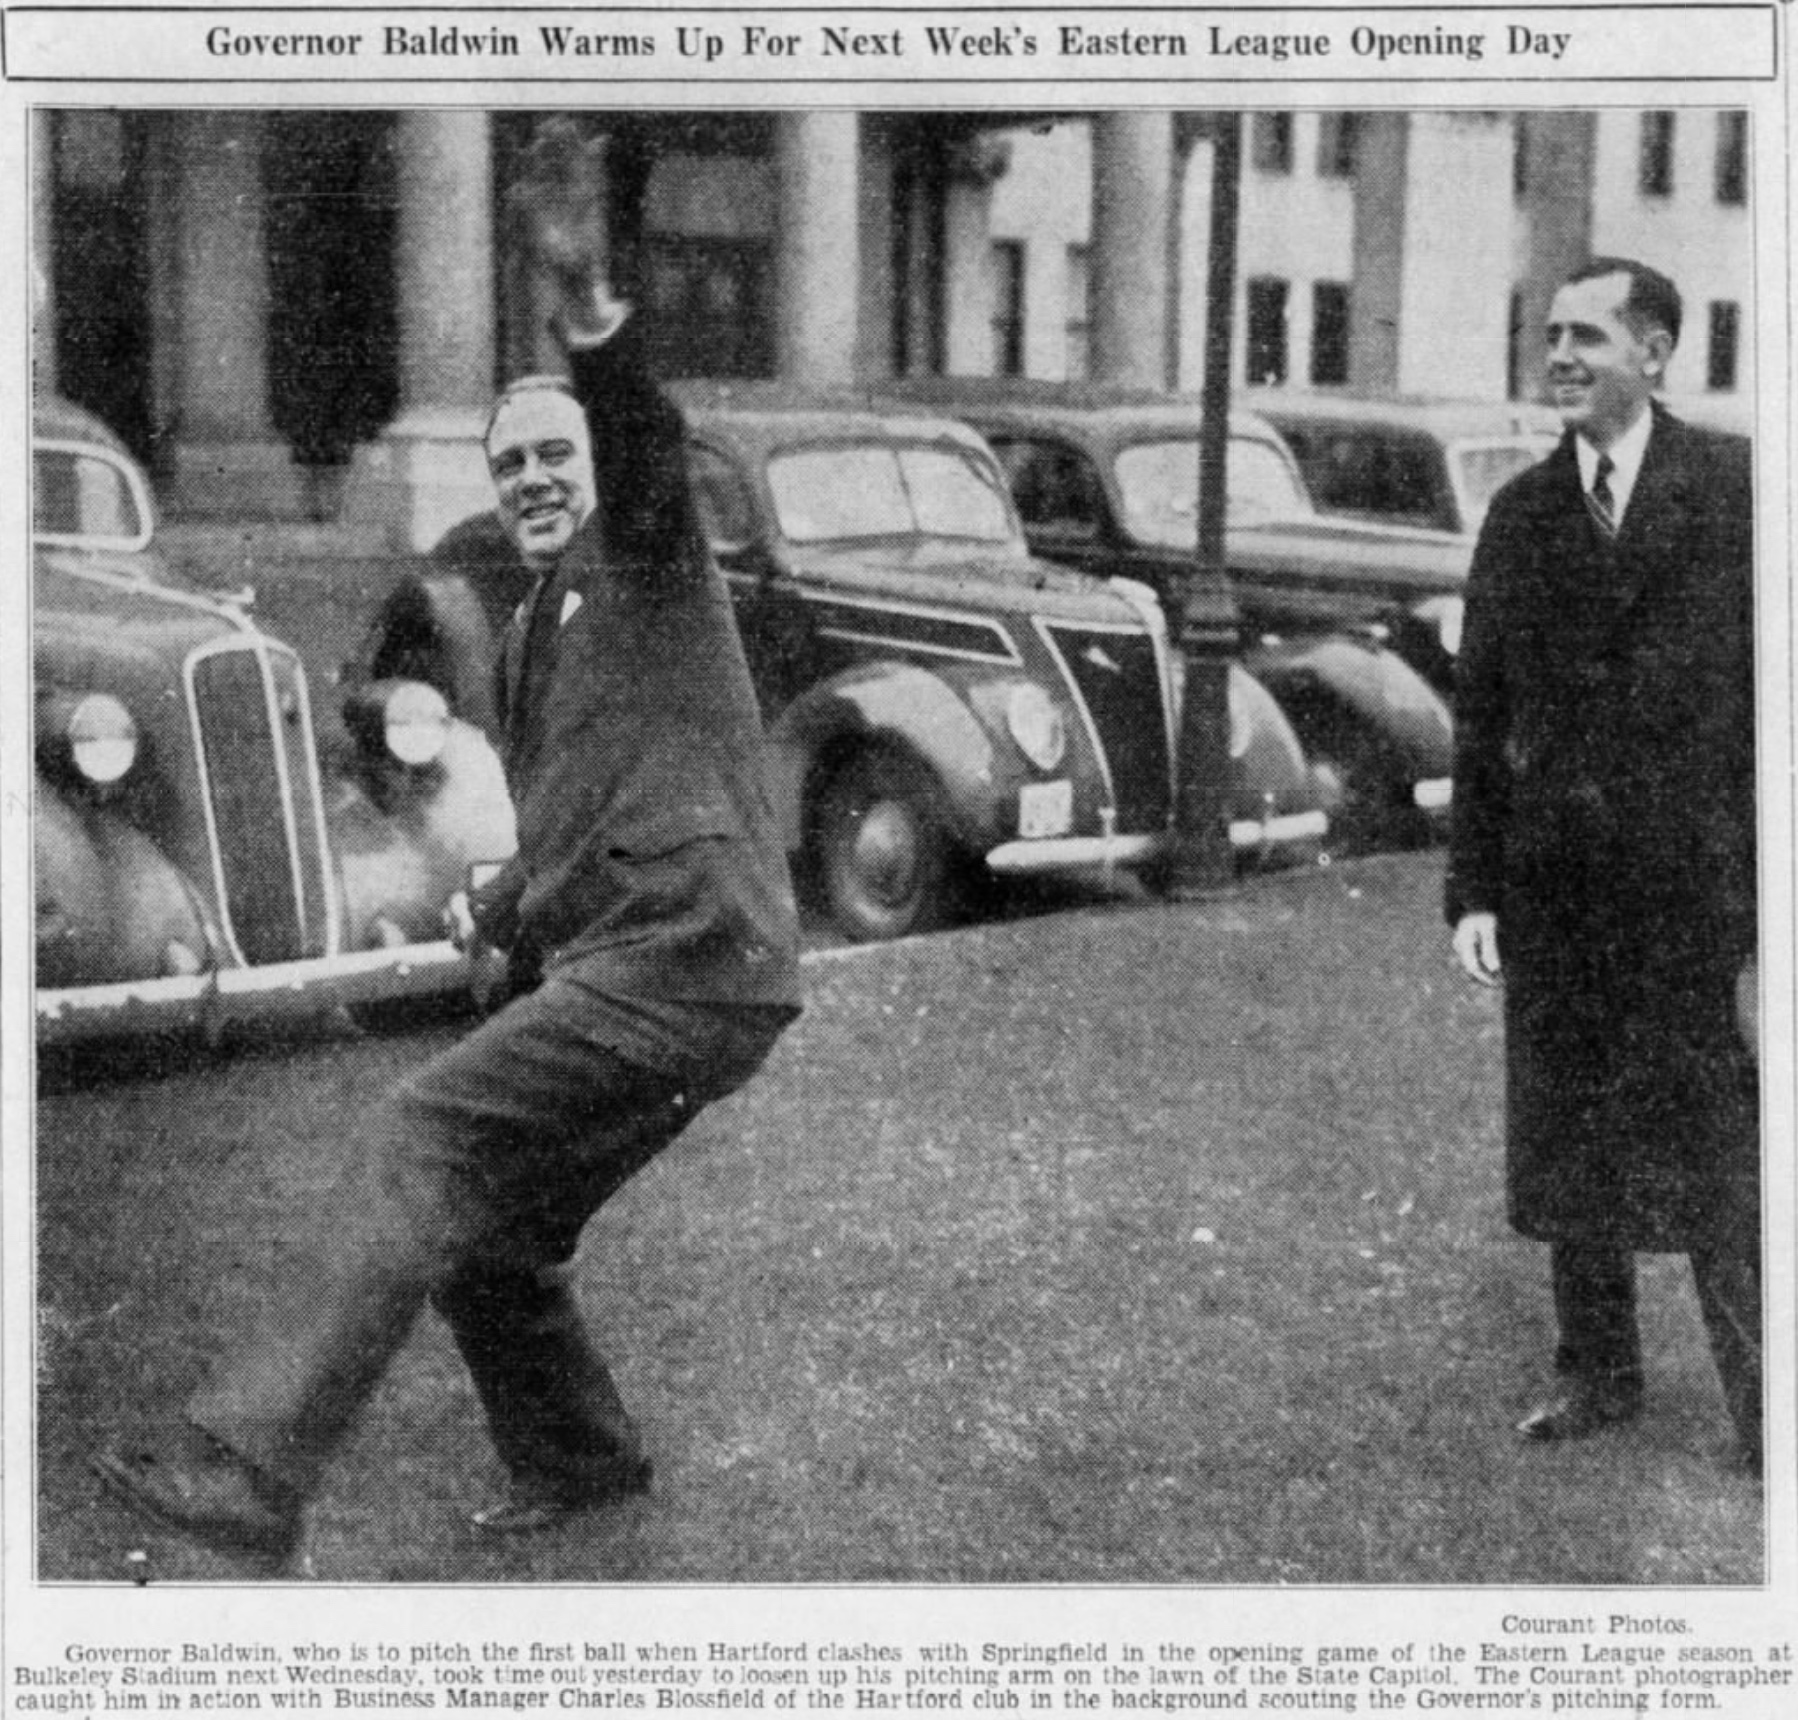 Governor Baldwin warming up his arm at the Connecticut State Capitol Building, 1939.